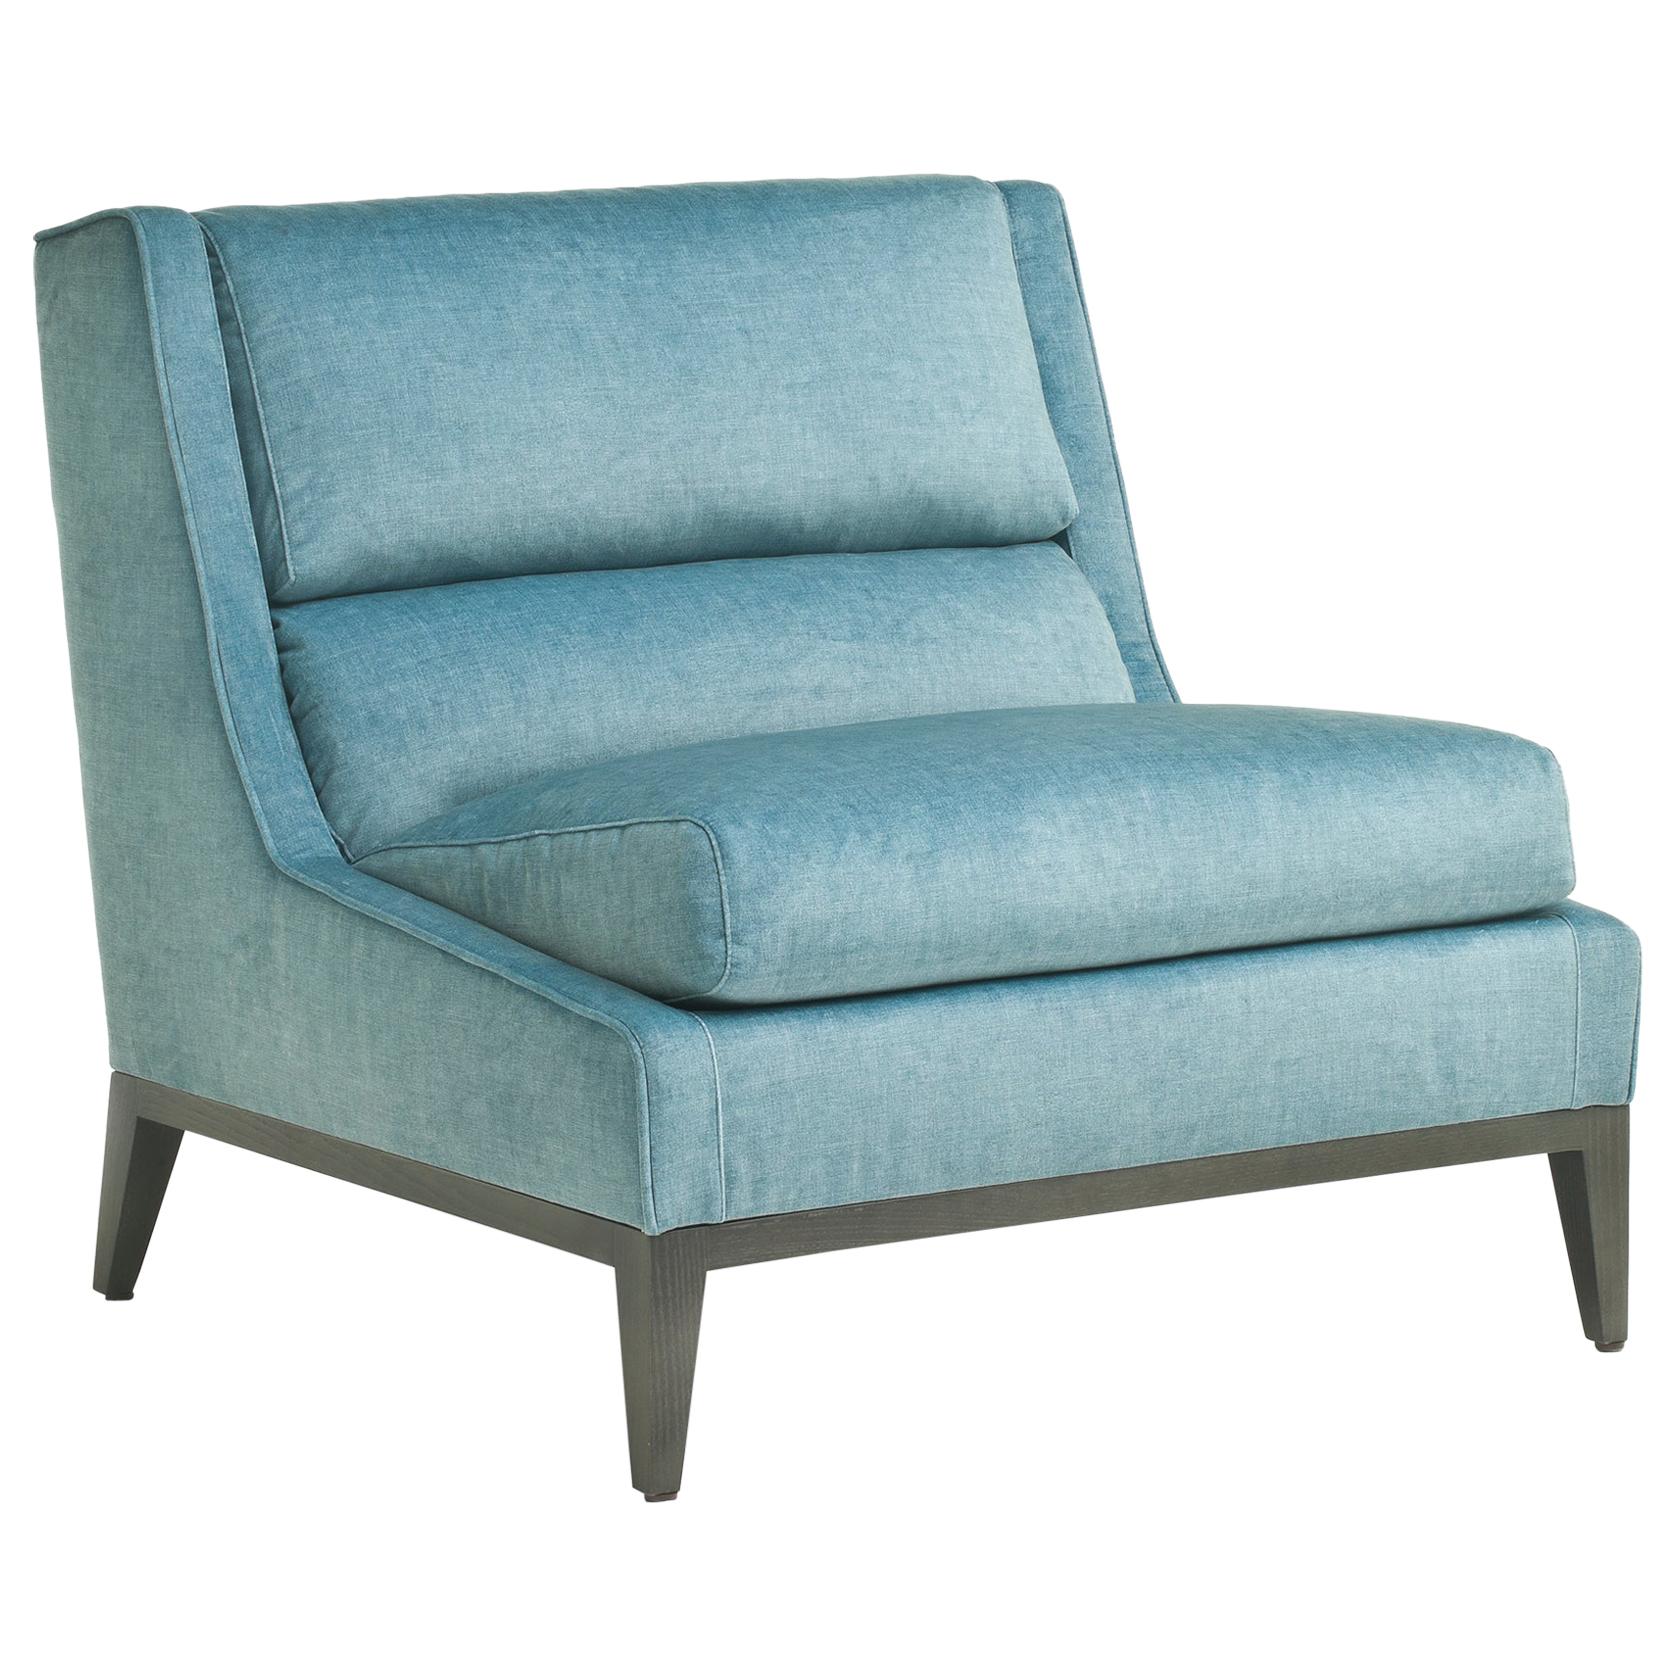 OVERSEAS Light Blue Upholstered Lounge Armchair in Solid Ash Wood and Black Fin.